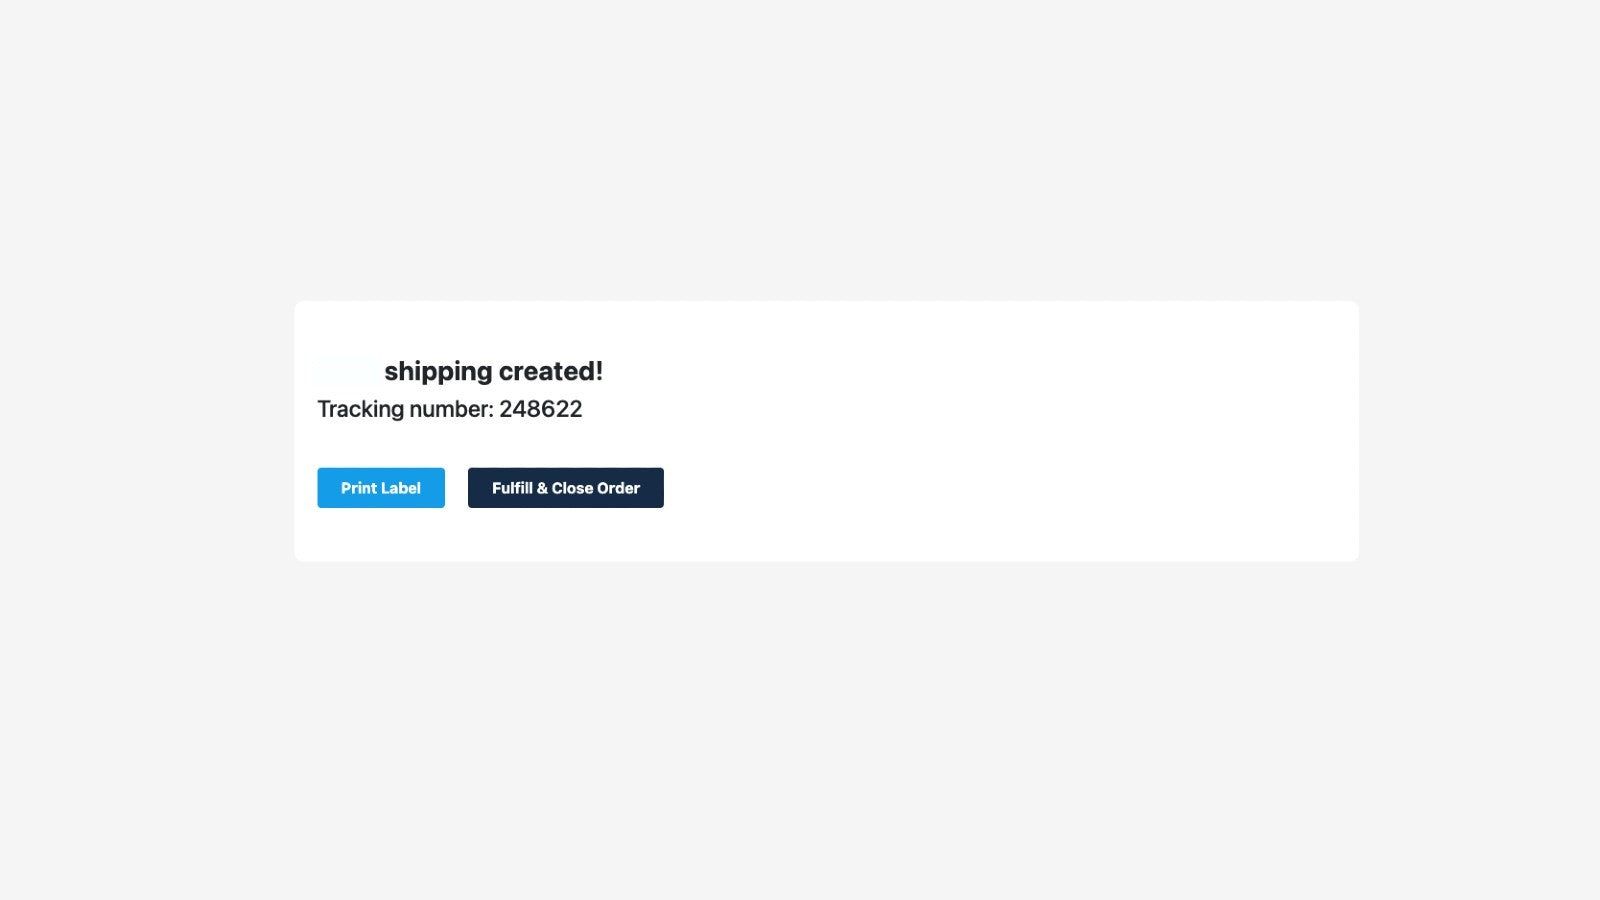 Get tracking number information and fulfill the order